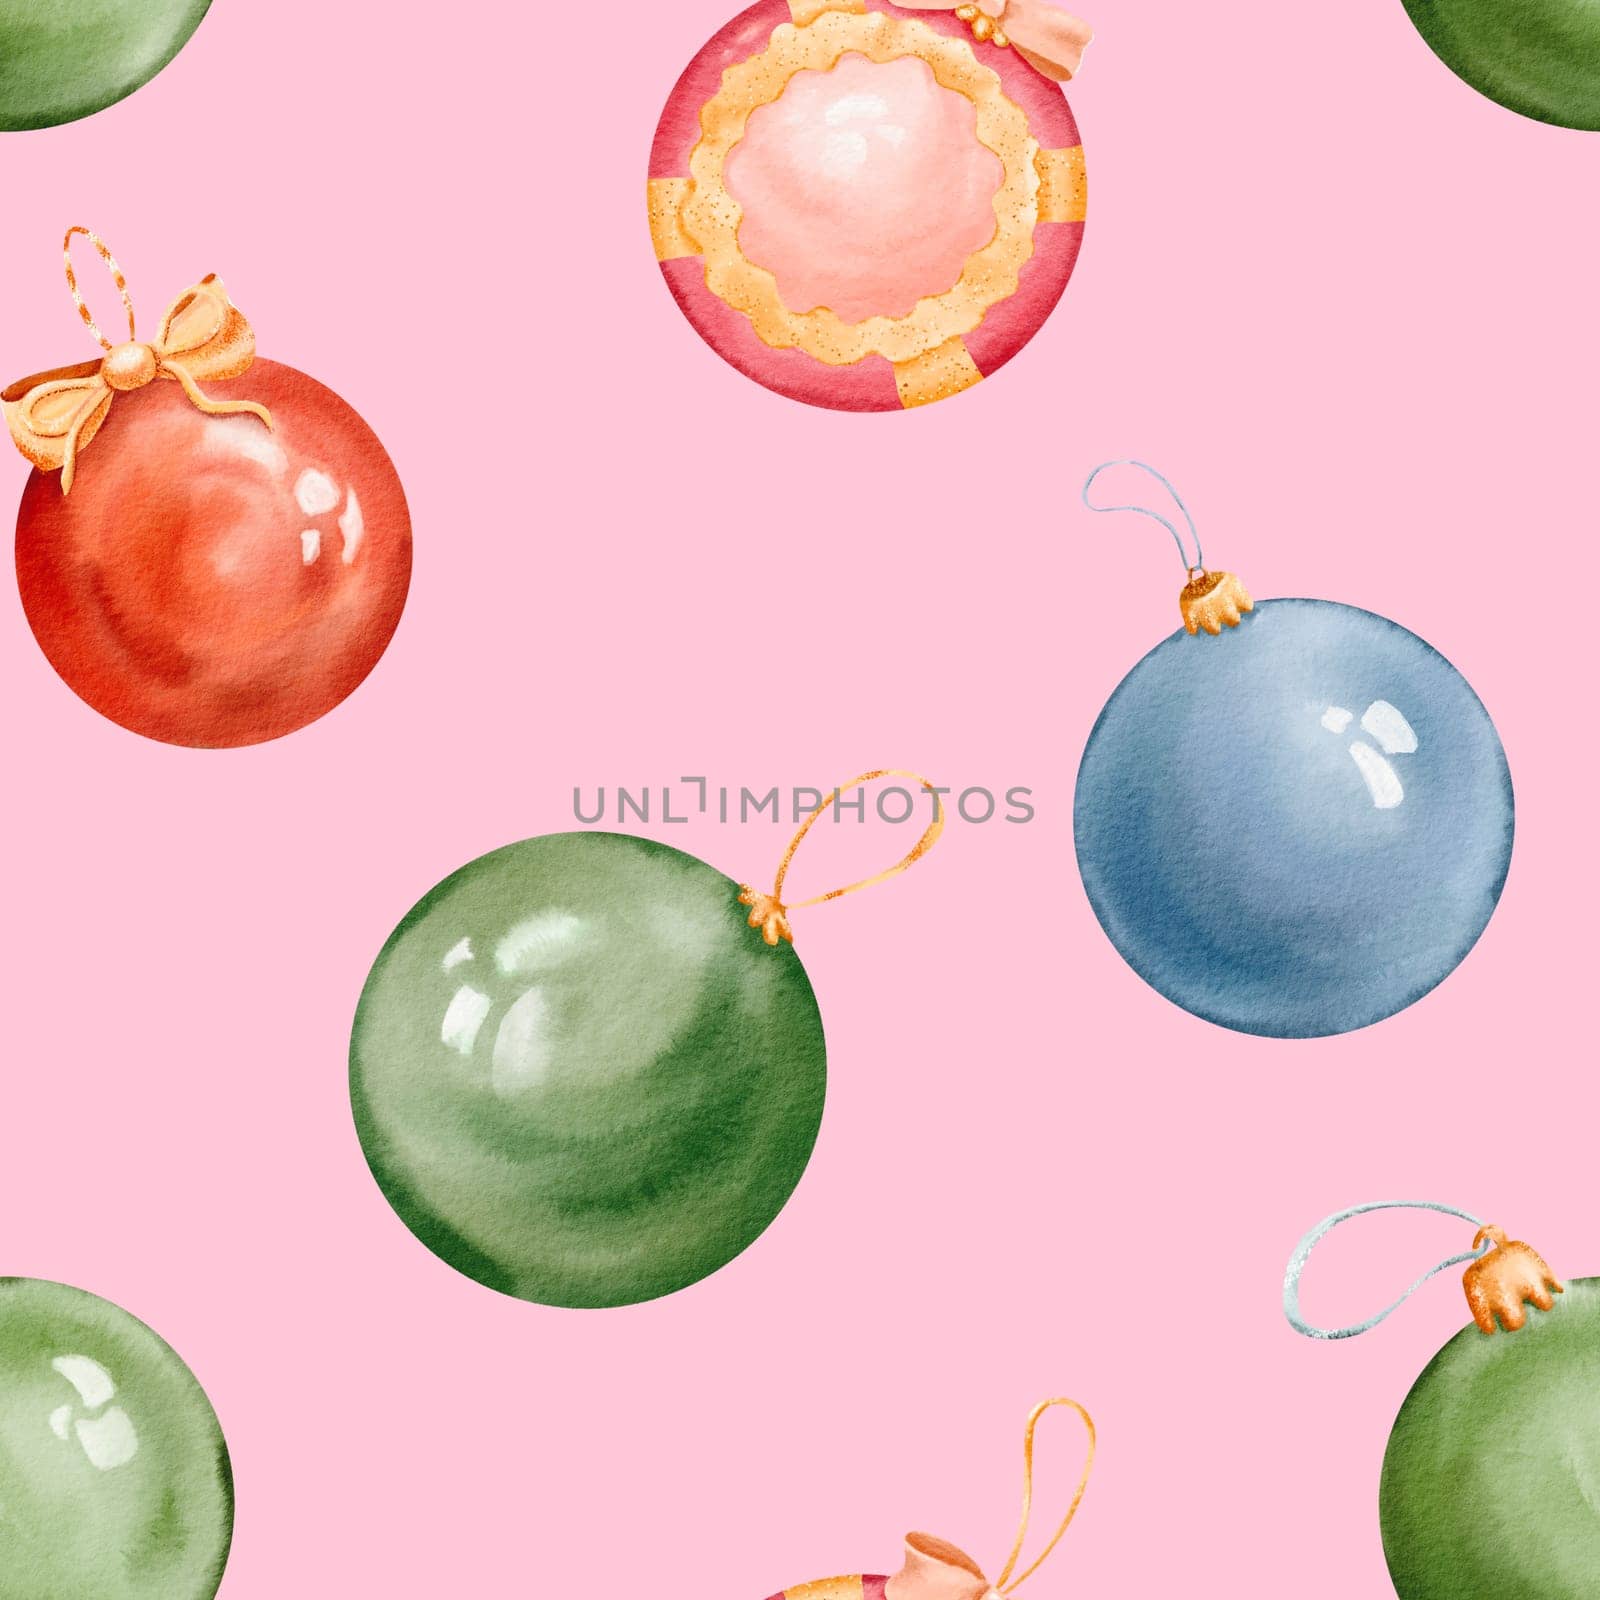 Seamless pattern of christmas balls hand made insolated watercolor illustration. winter season. decorative background for pine tree, greeting card, bauble decorations, books. New Year holiday circle